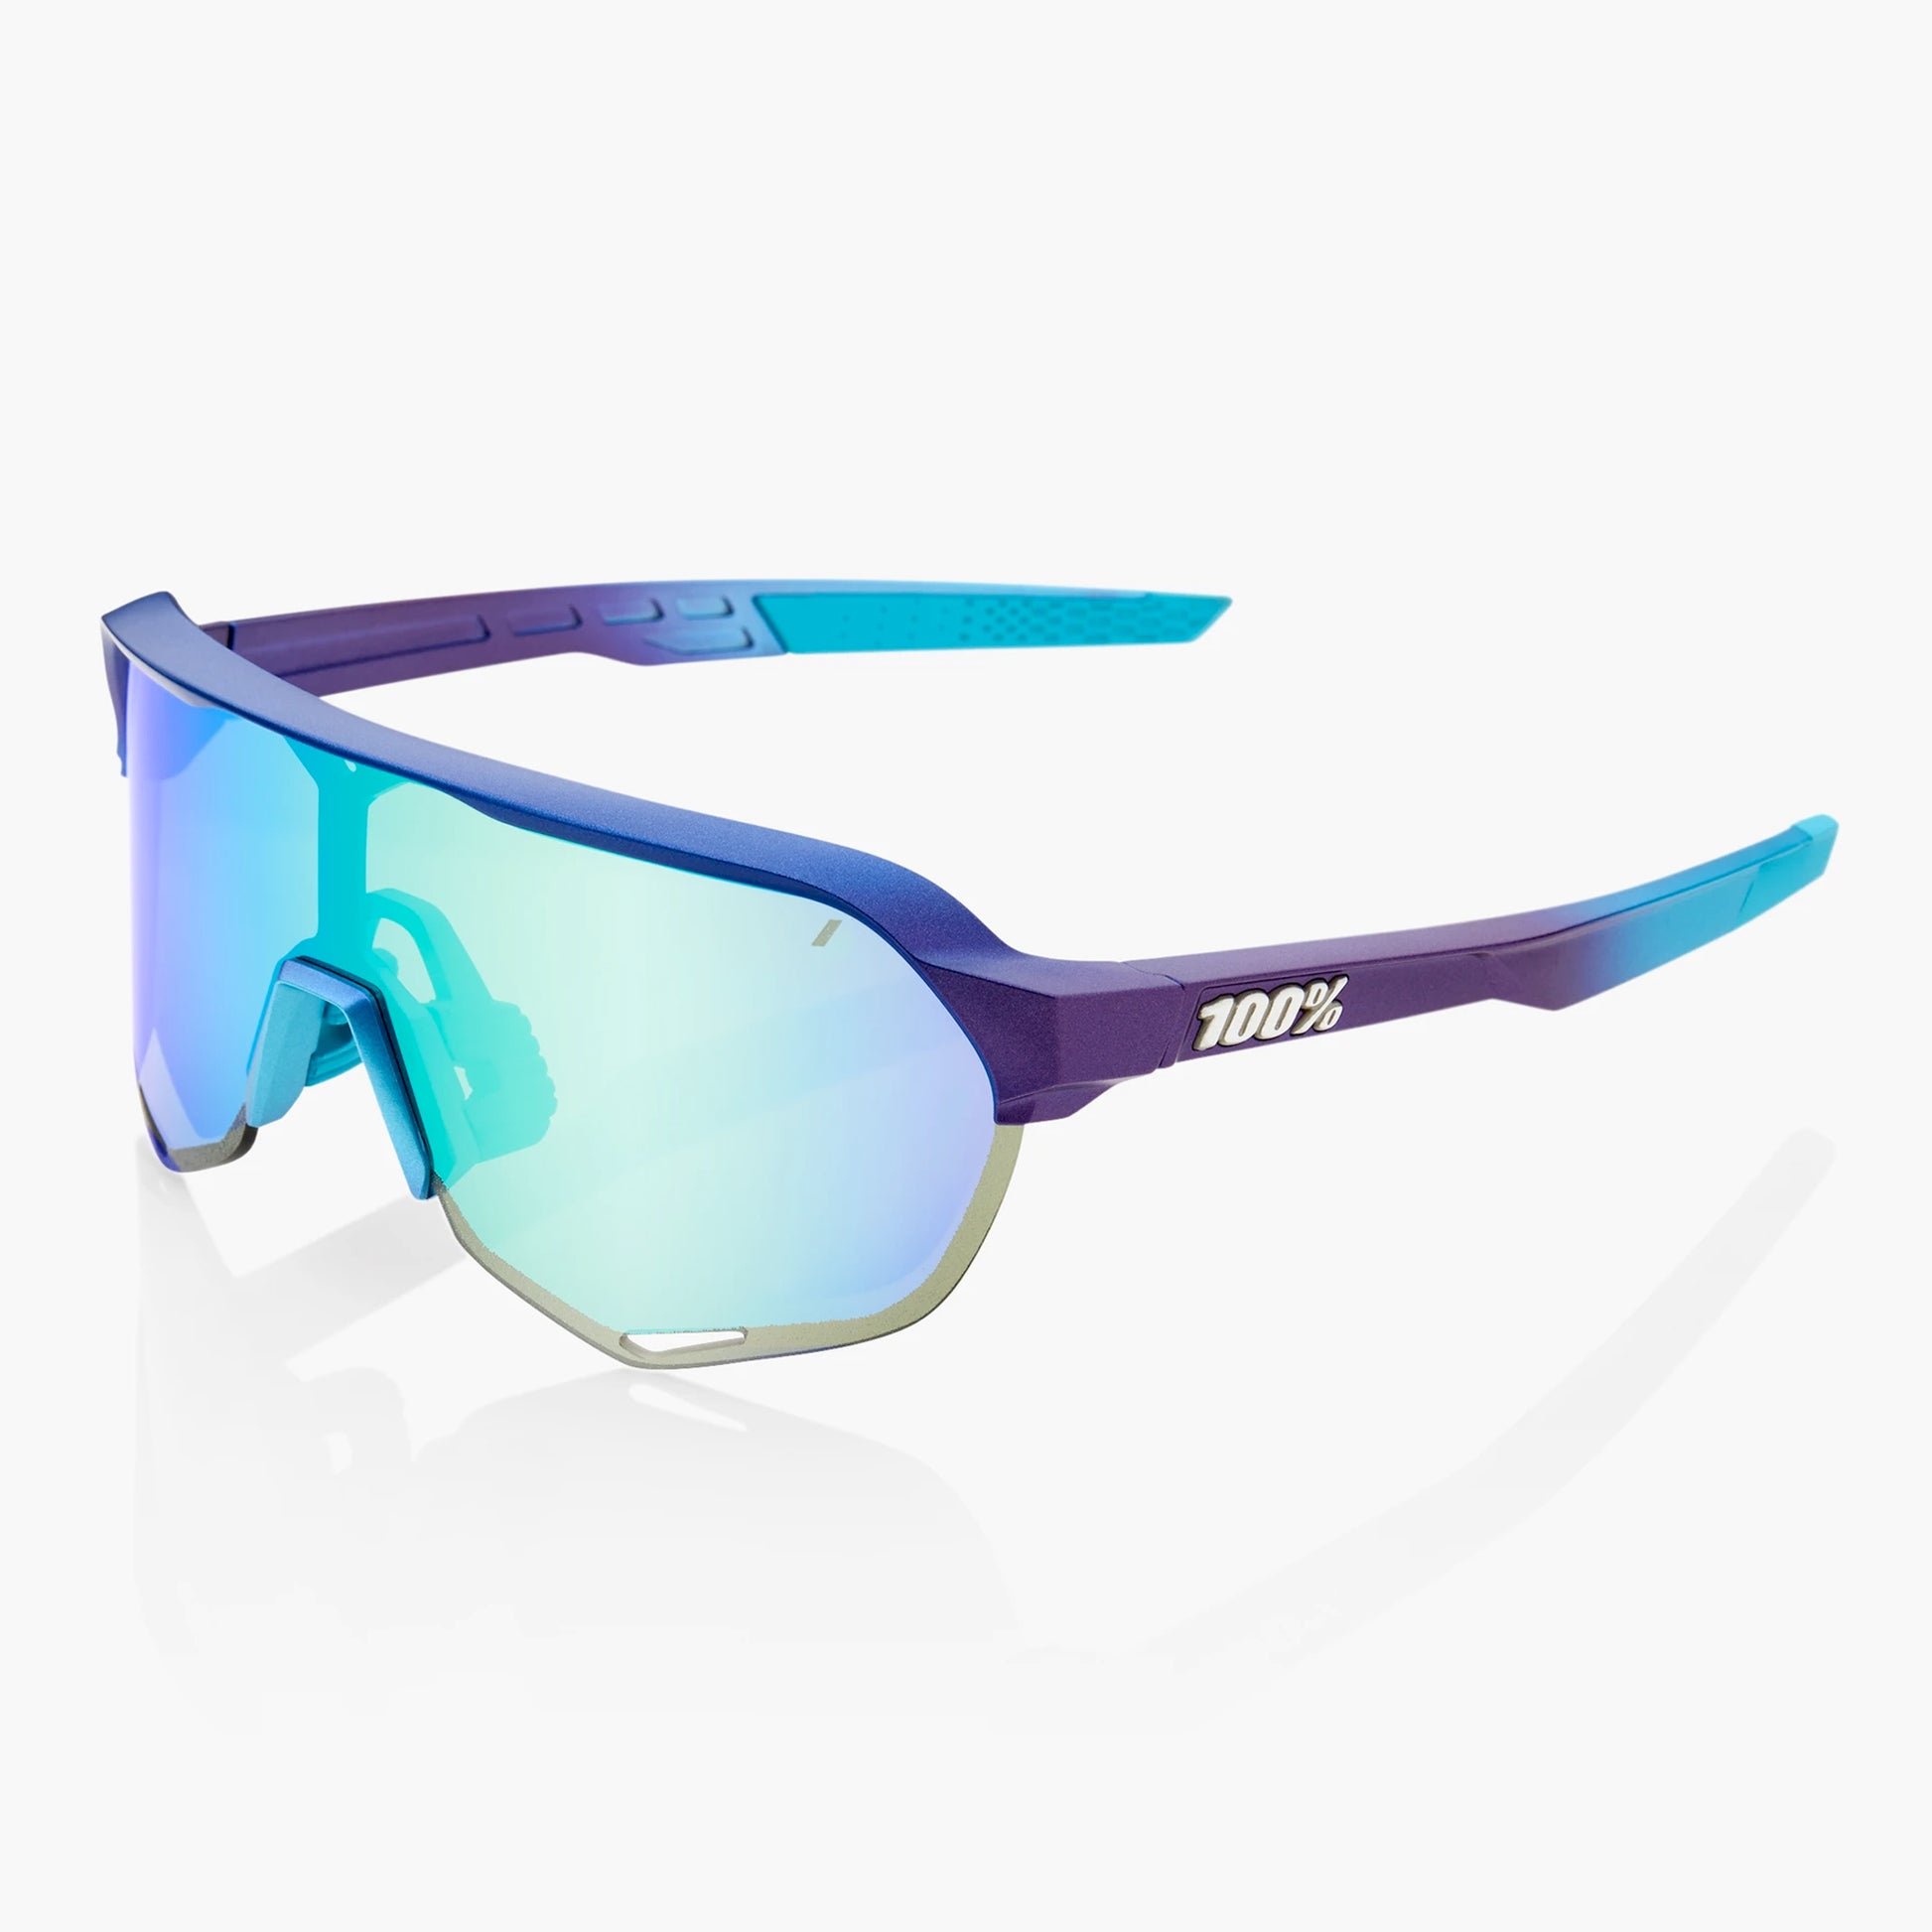 100% S2 Cycling Sunglasses - Matte Metallic Into the Fade Blue Topaz Multilayer Mirror Lens + Clear Lens Included buy online at Woolys Wheels bike shop Sydney with free delivery